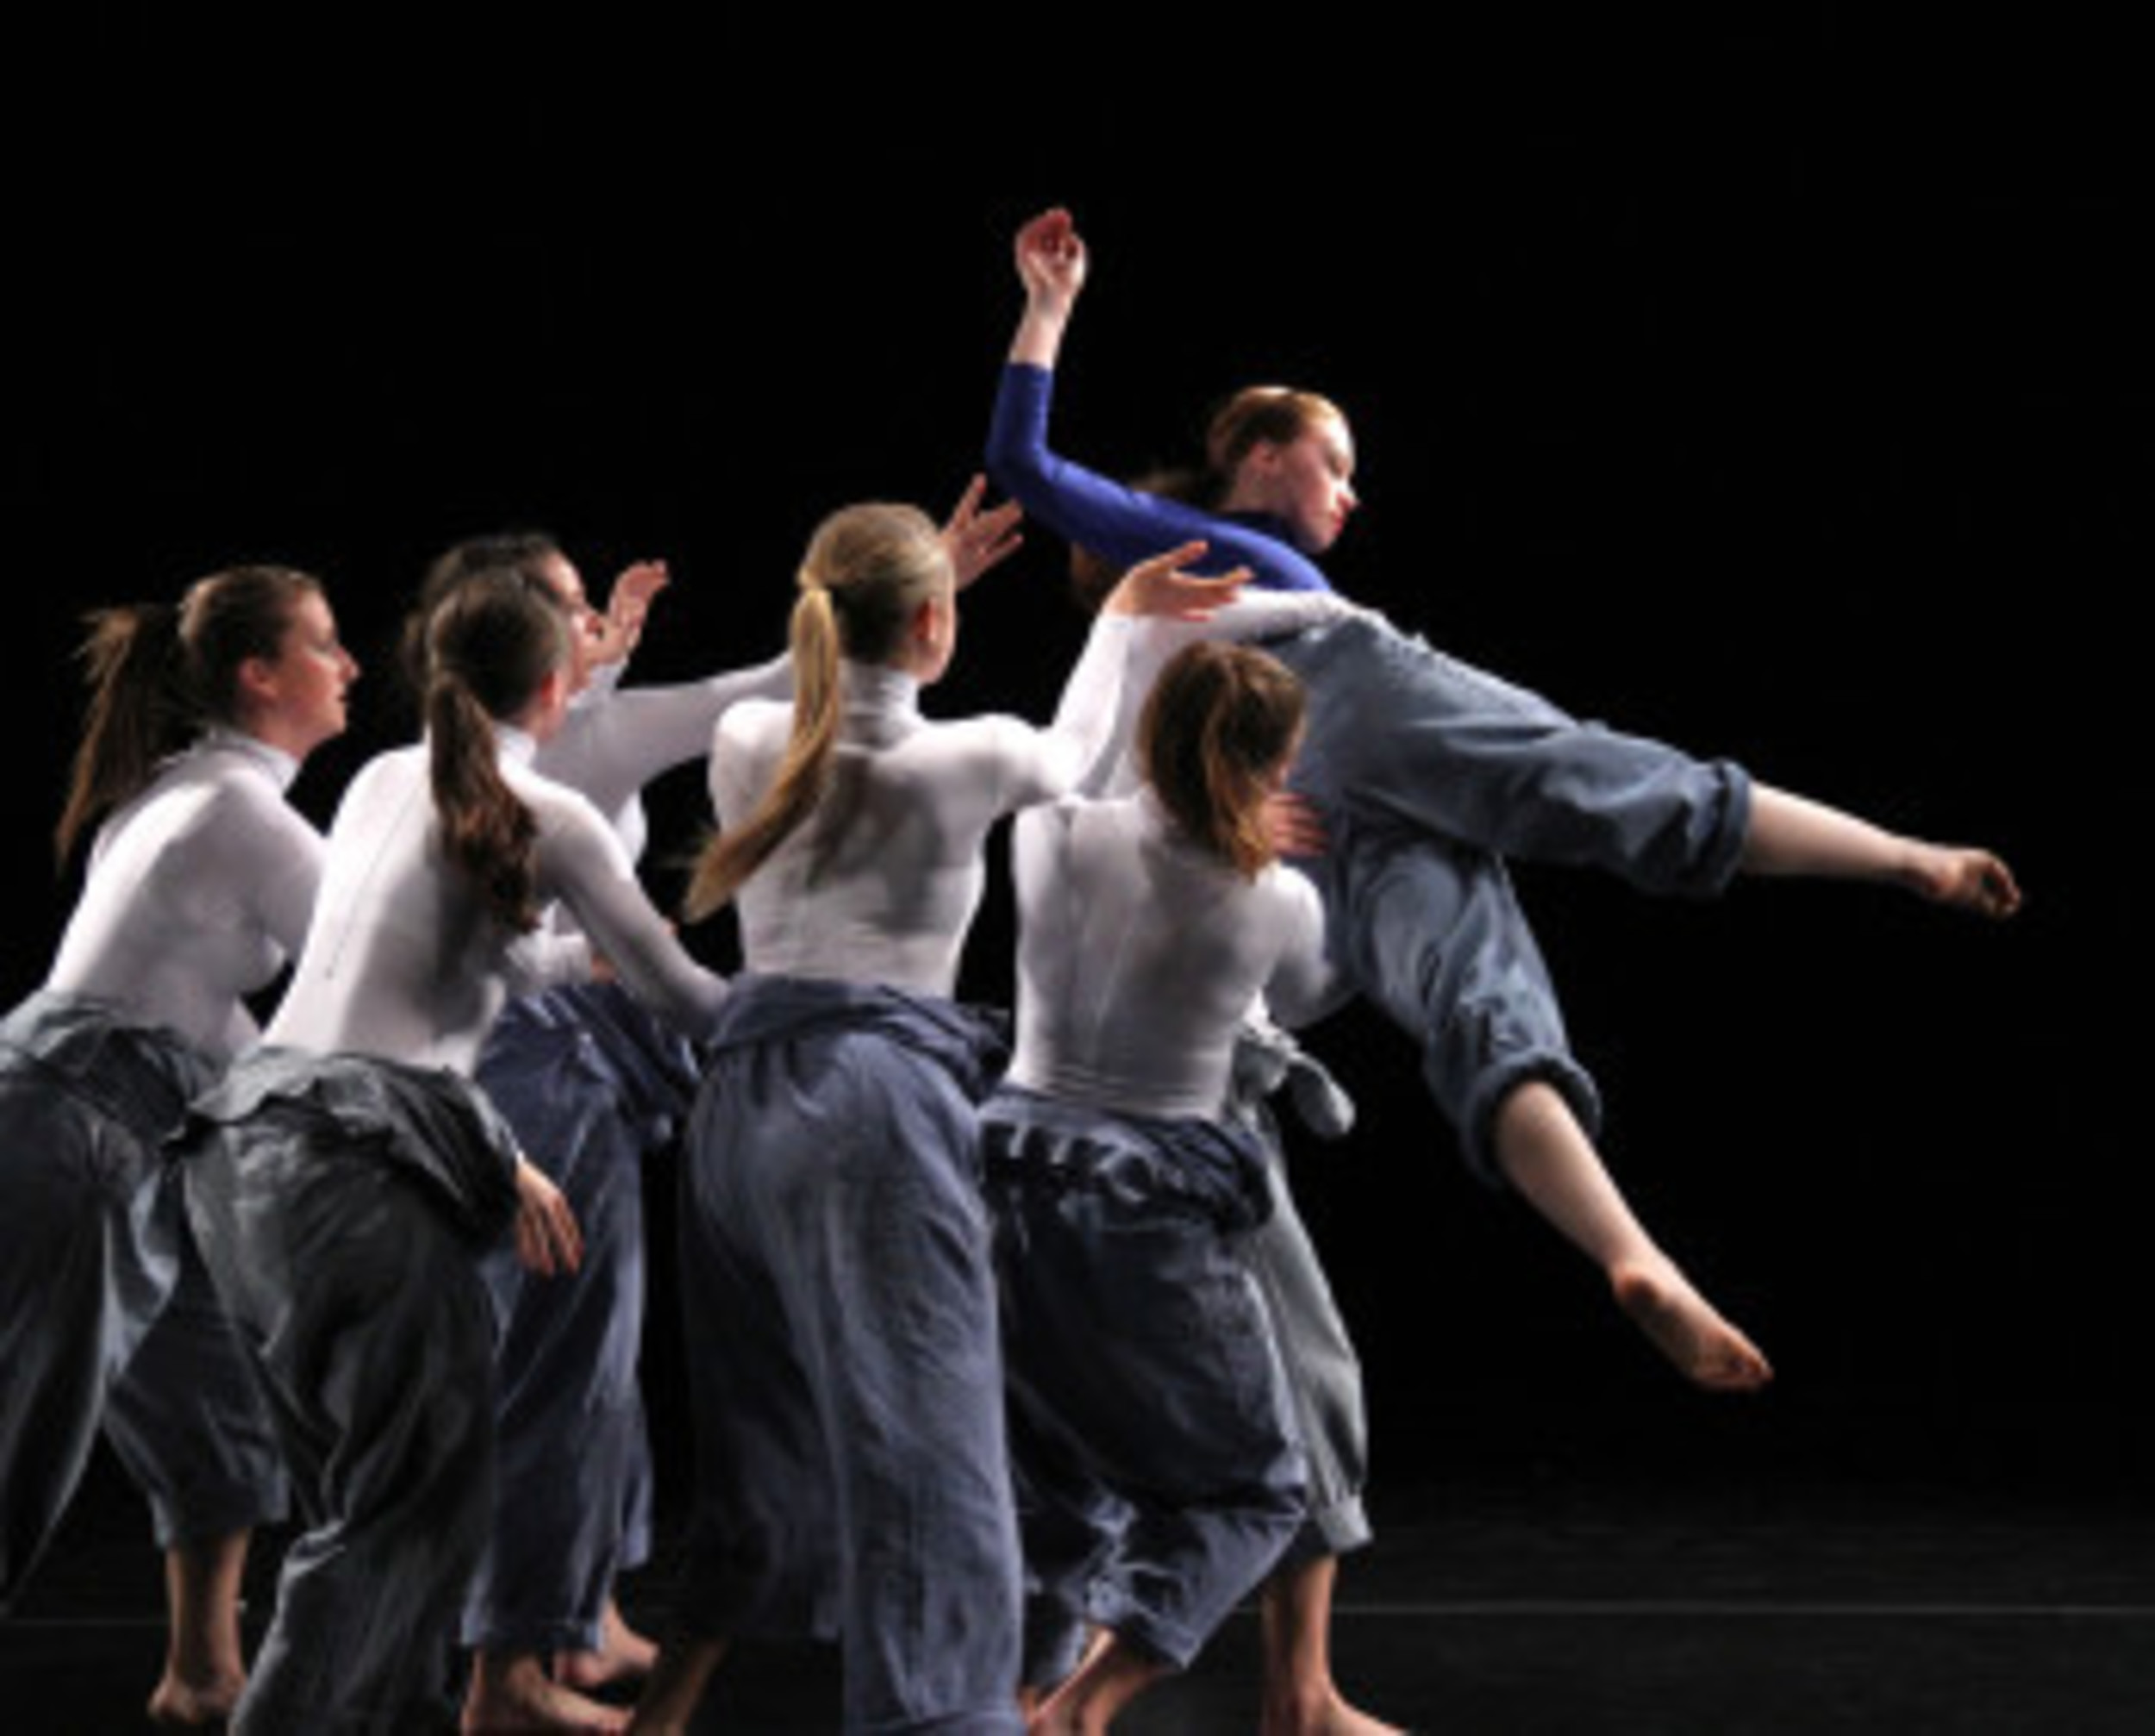 RWU Dance Theatre in concert News, Opinion, Things to